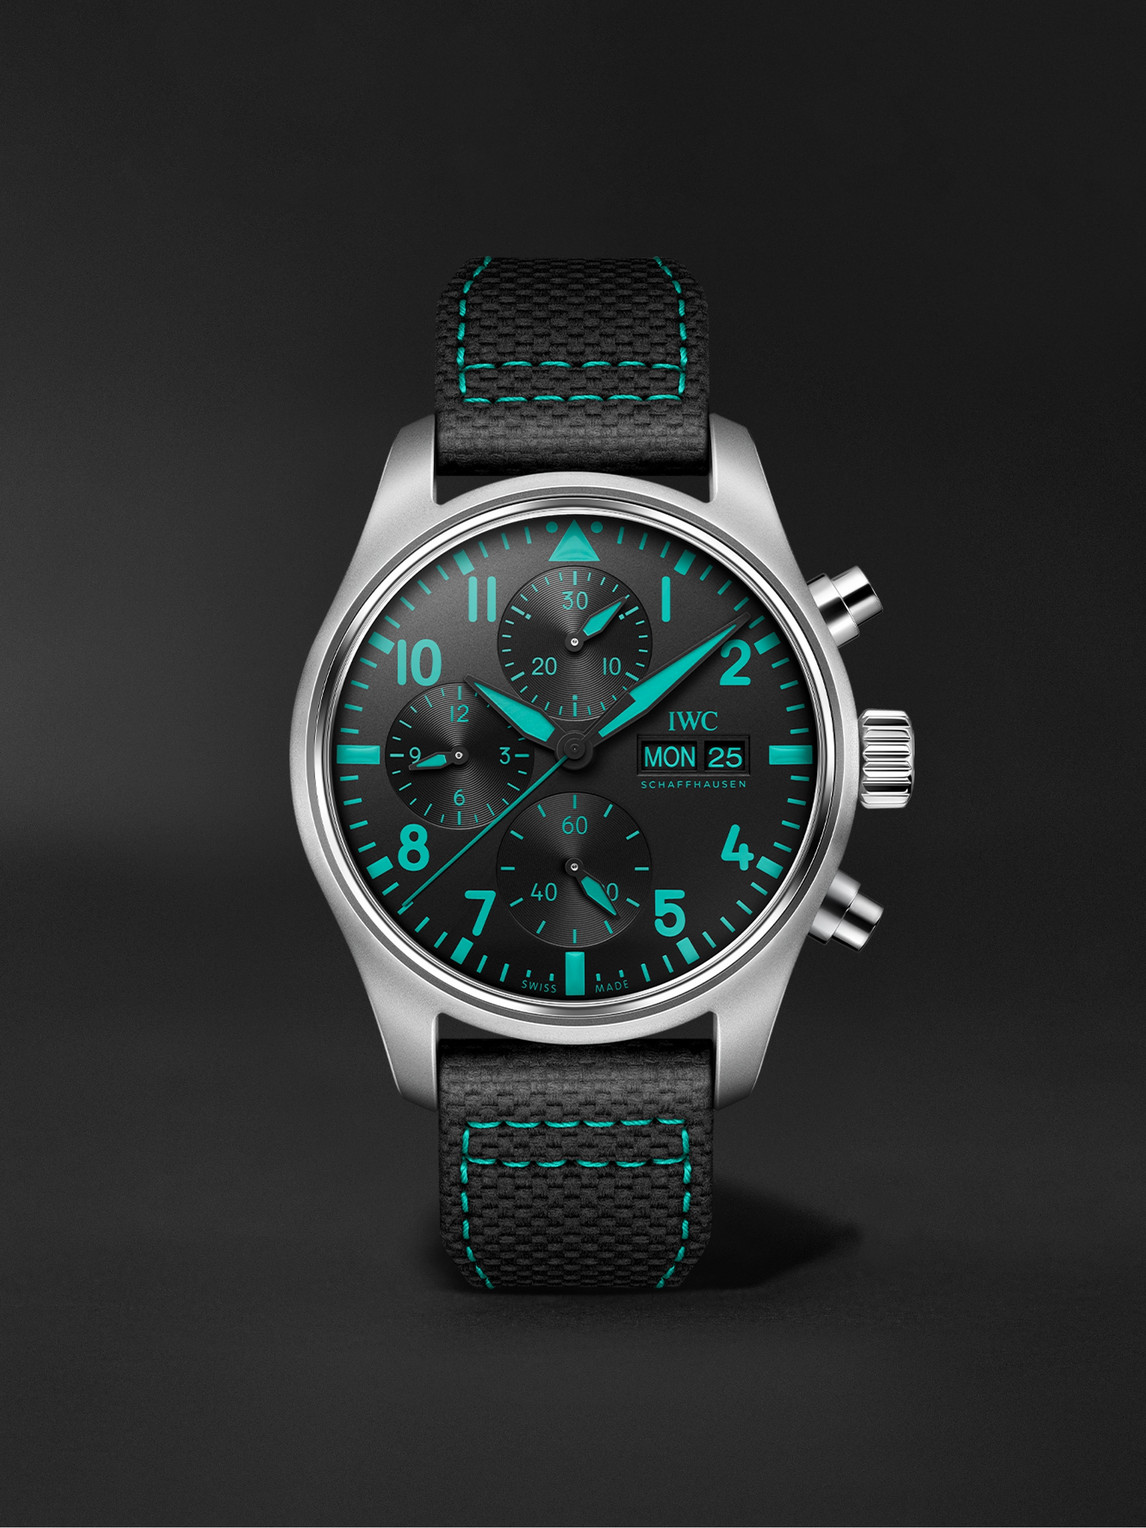 Pilot's Watch Mercedes-AMG Petronas Formula One™ Team Edition Automatic Chronograph 41mm Titanium and Leather Watch, Ref. No. IWIW388108